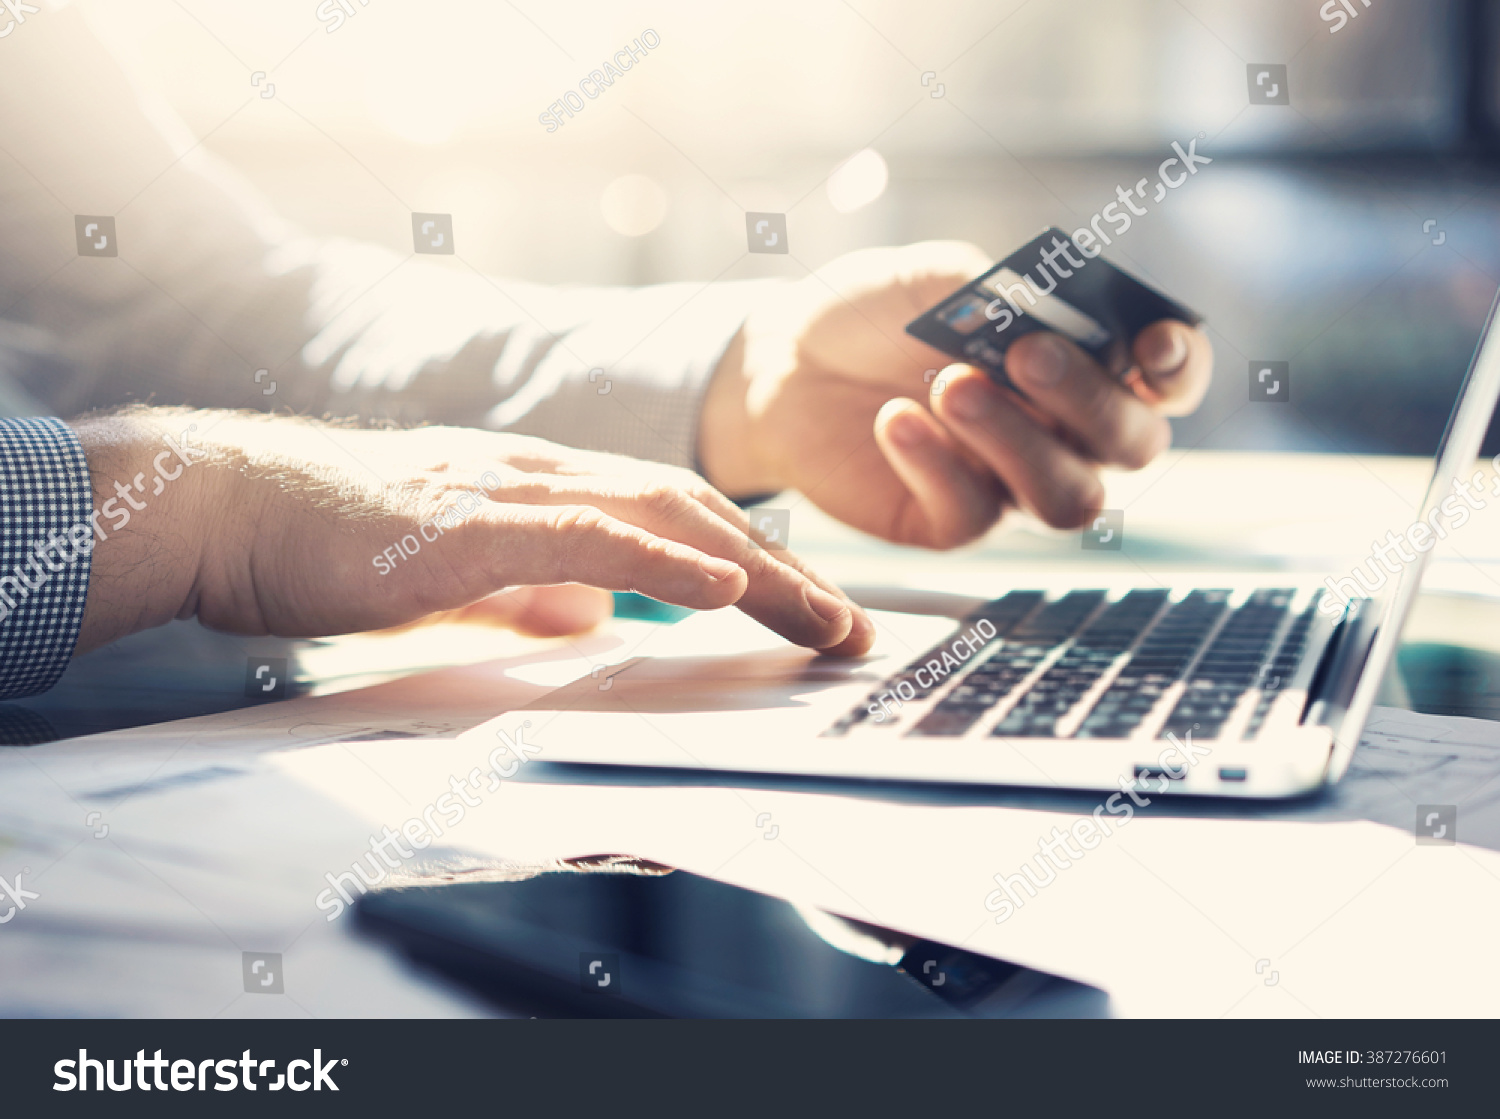 Photo businessman working with generic design notebook. Online payments, banking, hands keyboard. Blurred background, film effect. horizontal mockup #387276601